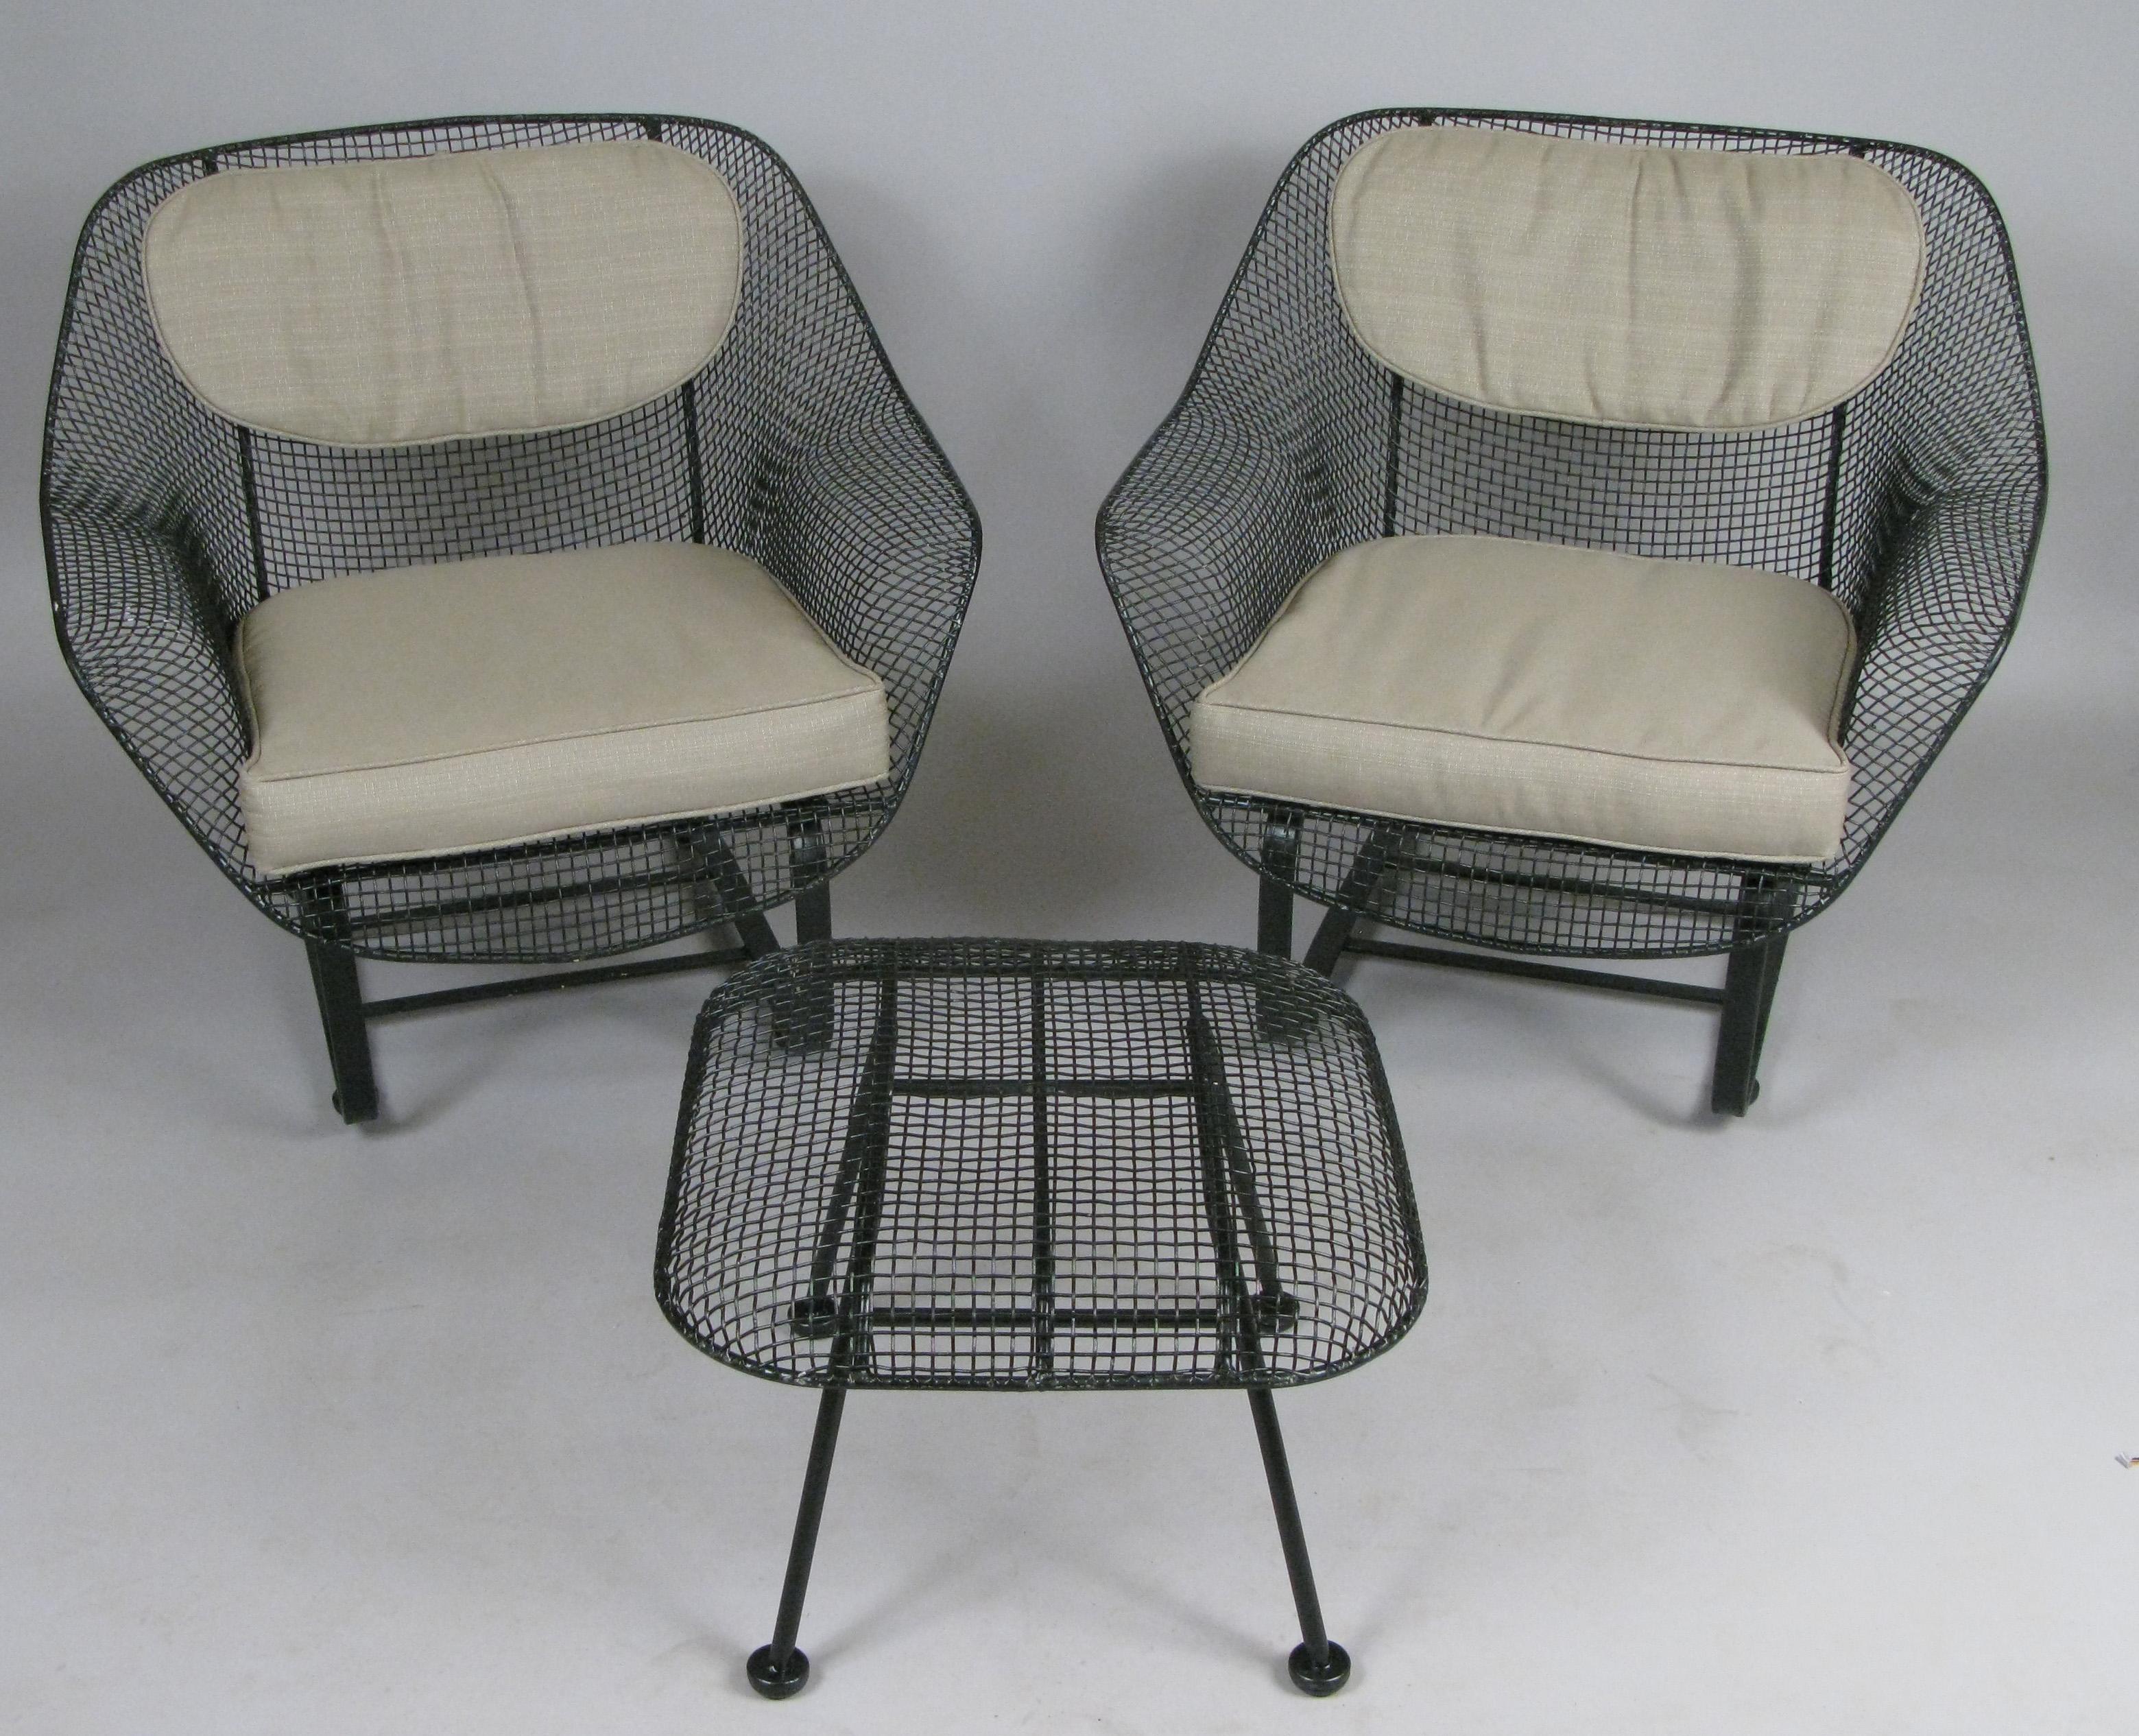 A pair of Classic vintage 1950s 'Sculptura' lounge chairs by Russell Woodard. The most comfortable and desirable of Russell Woodard's Classic and iconic 'Sculptura' collection, the lounge chair is formed entirely of woven steel mesh, mounted on a